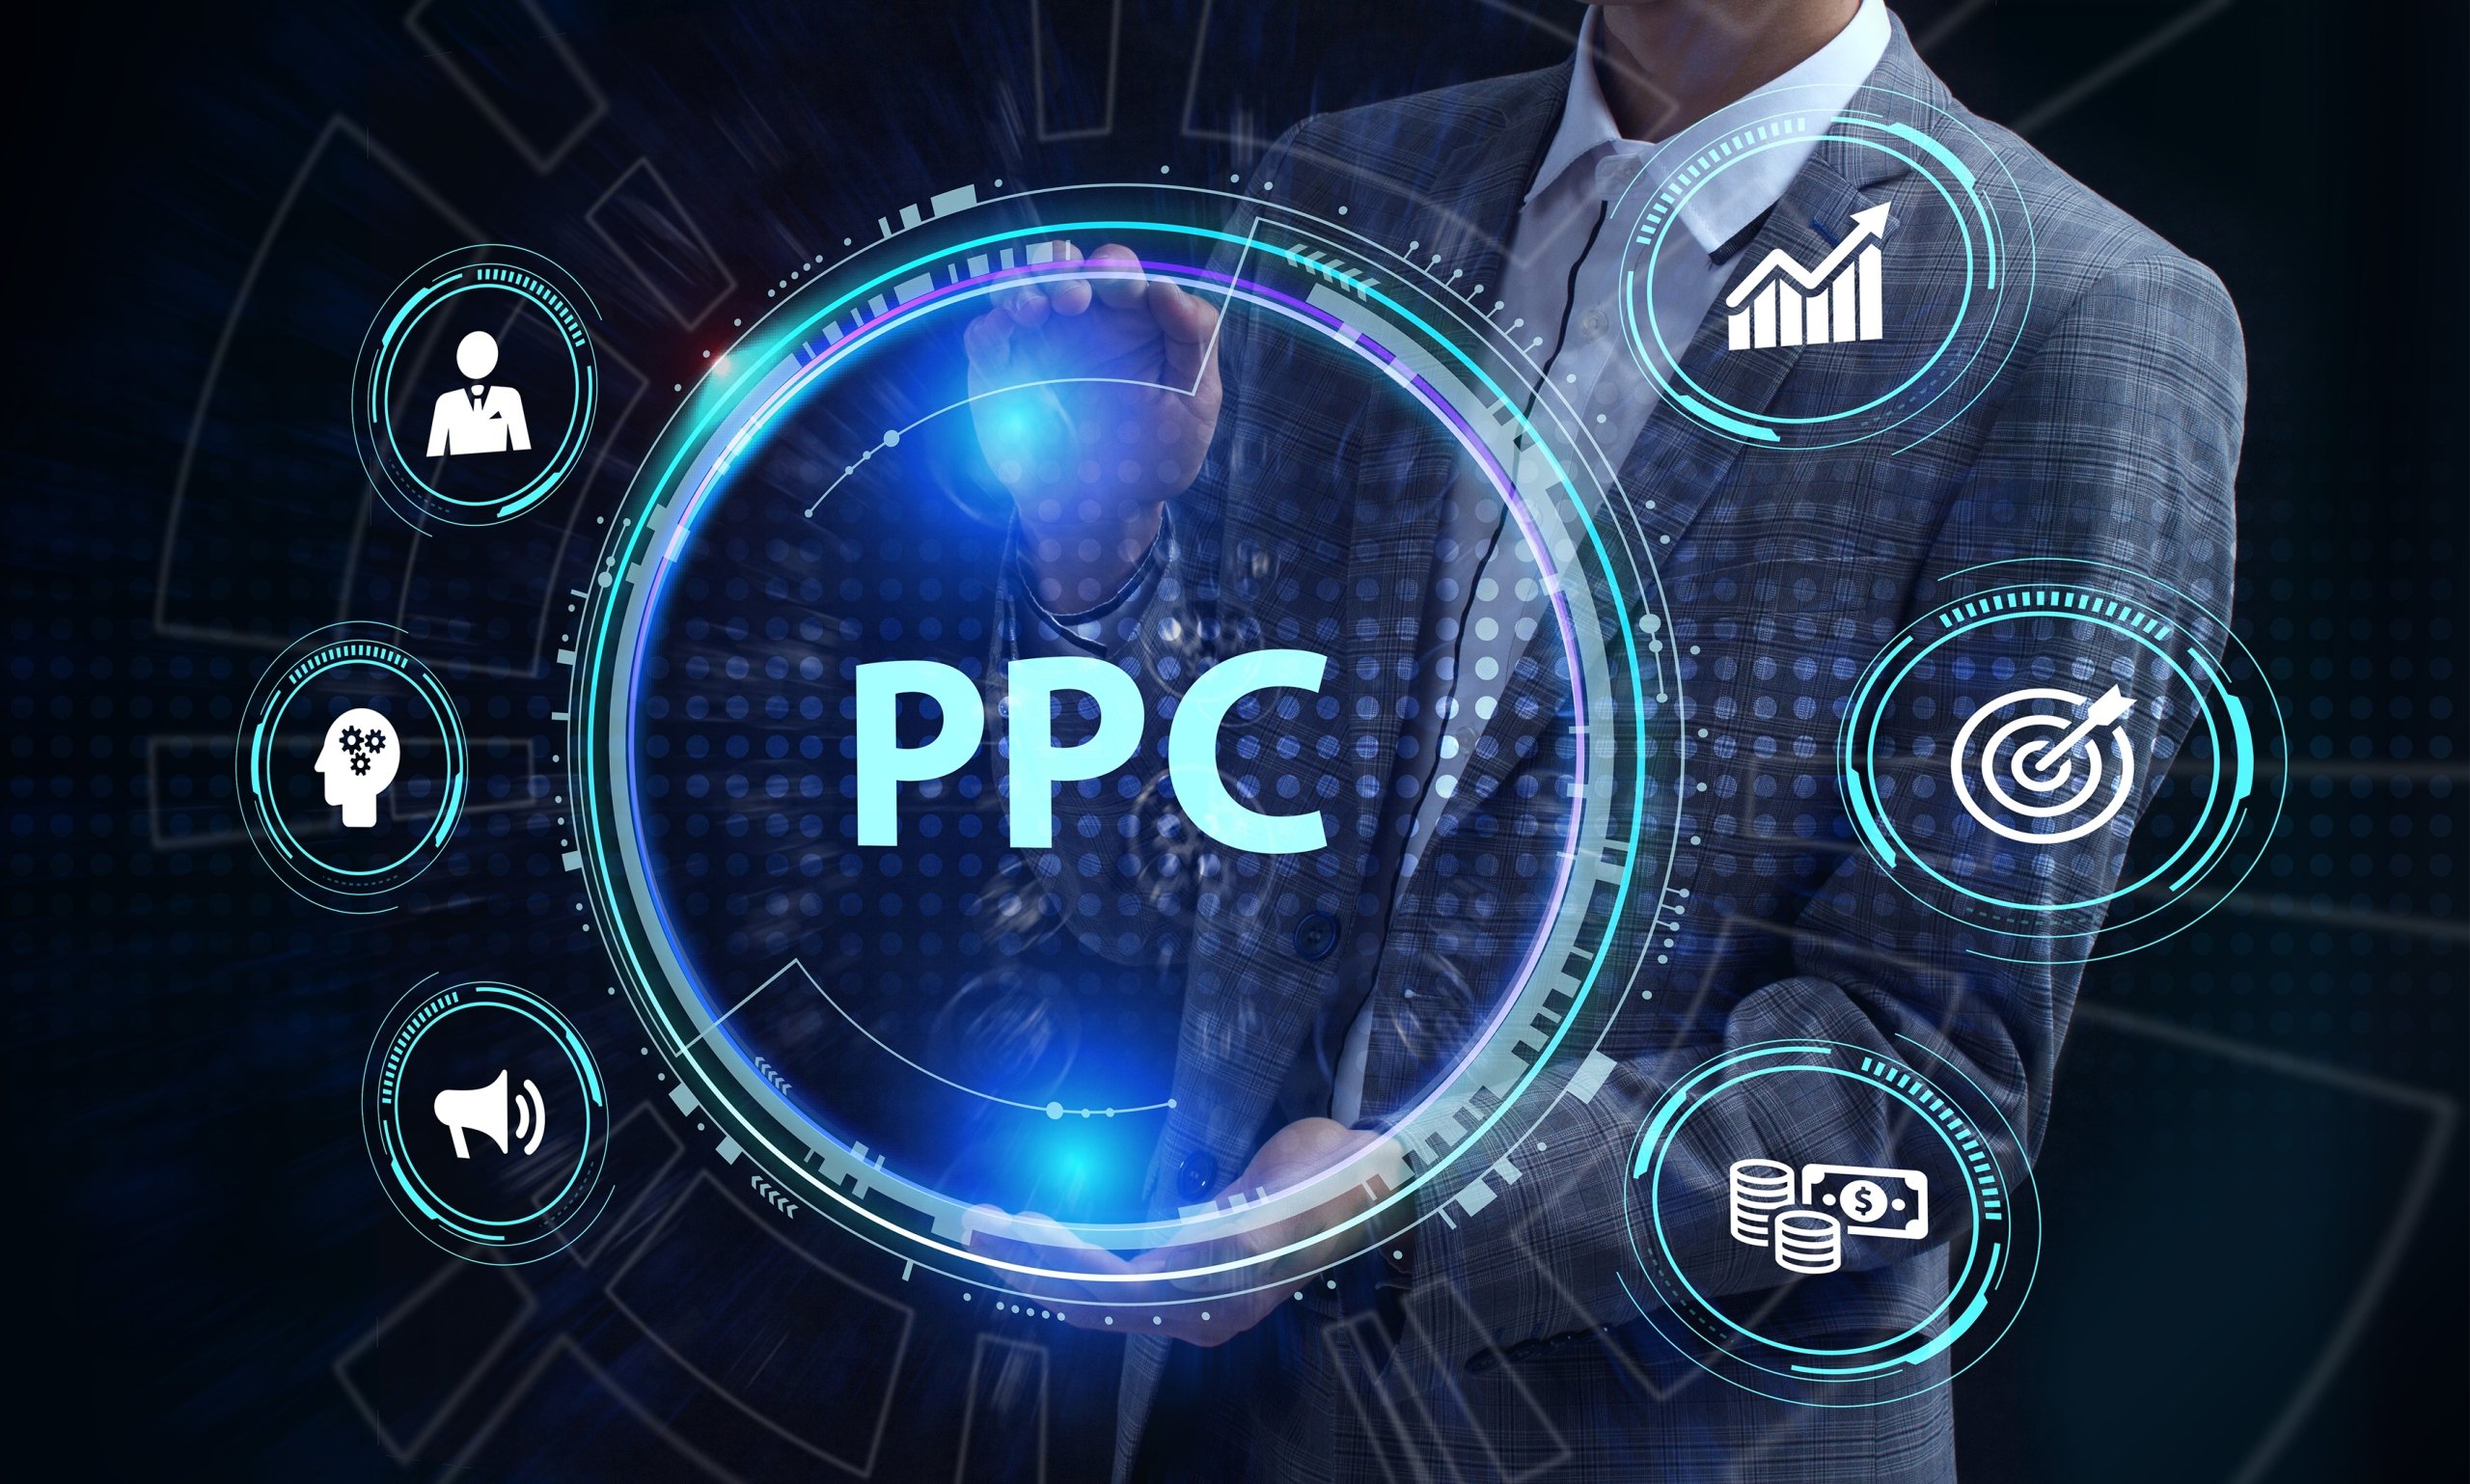 Top Ten PPC Tips to Help Elevate Your PPC Game!